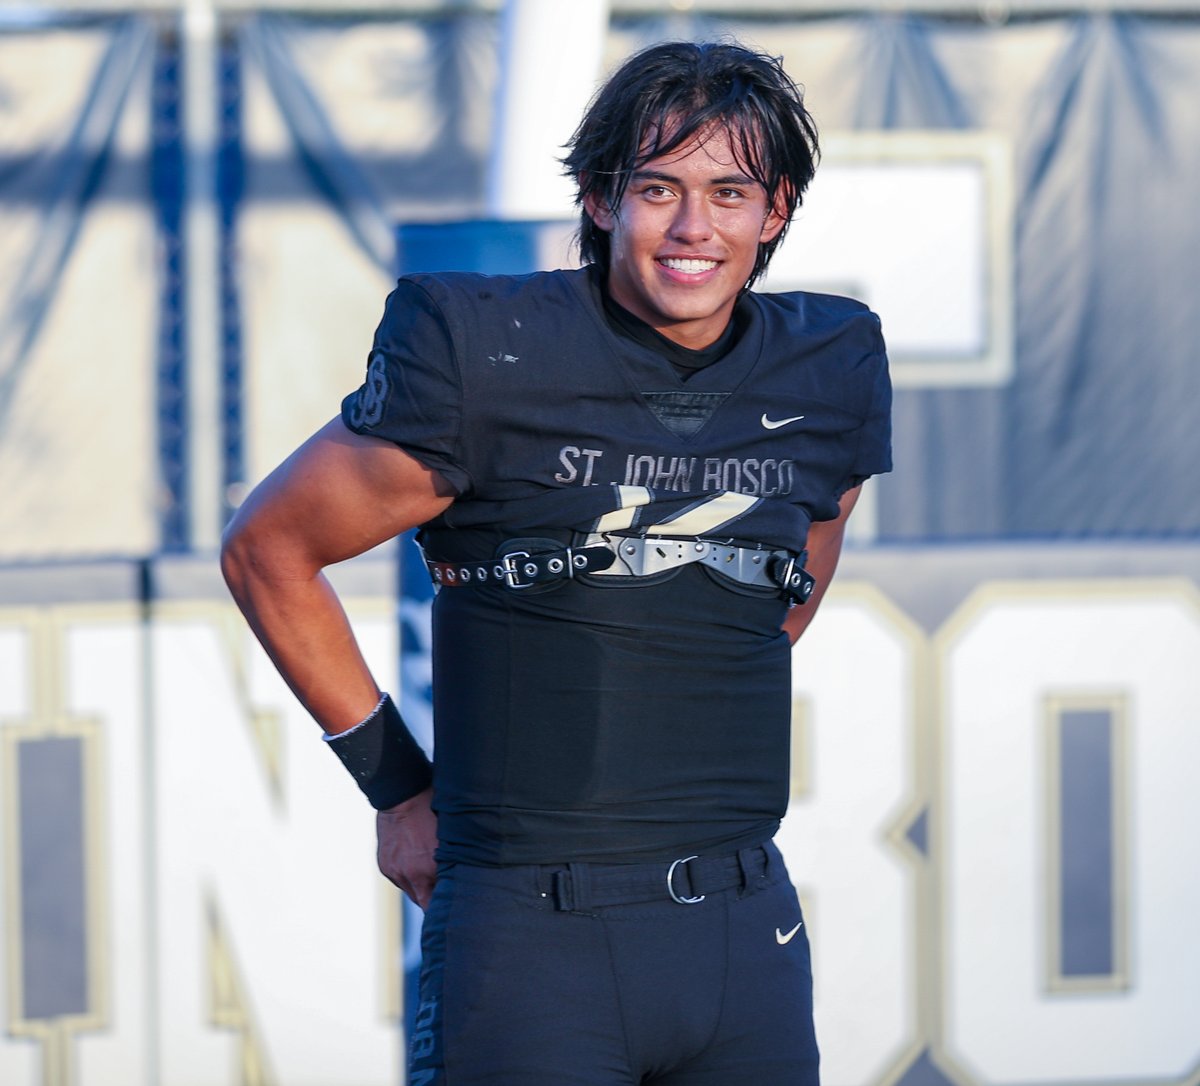 You can say it now after eight games: The best quarterback in the Trinity League. Caleb Sanchez of St. John Bosco.